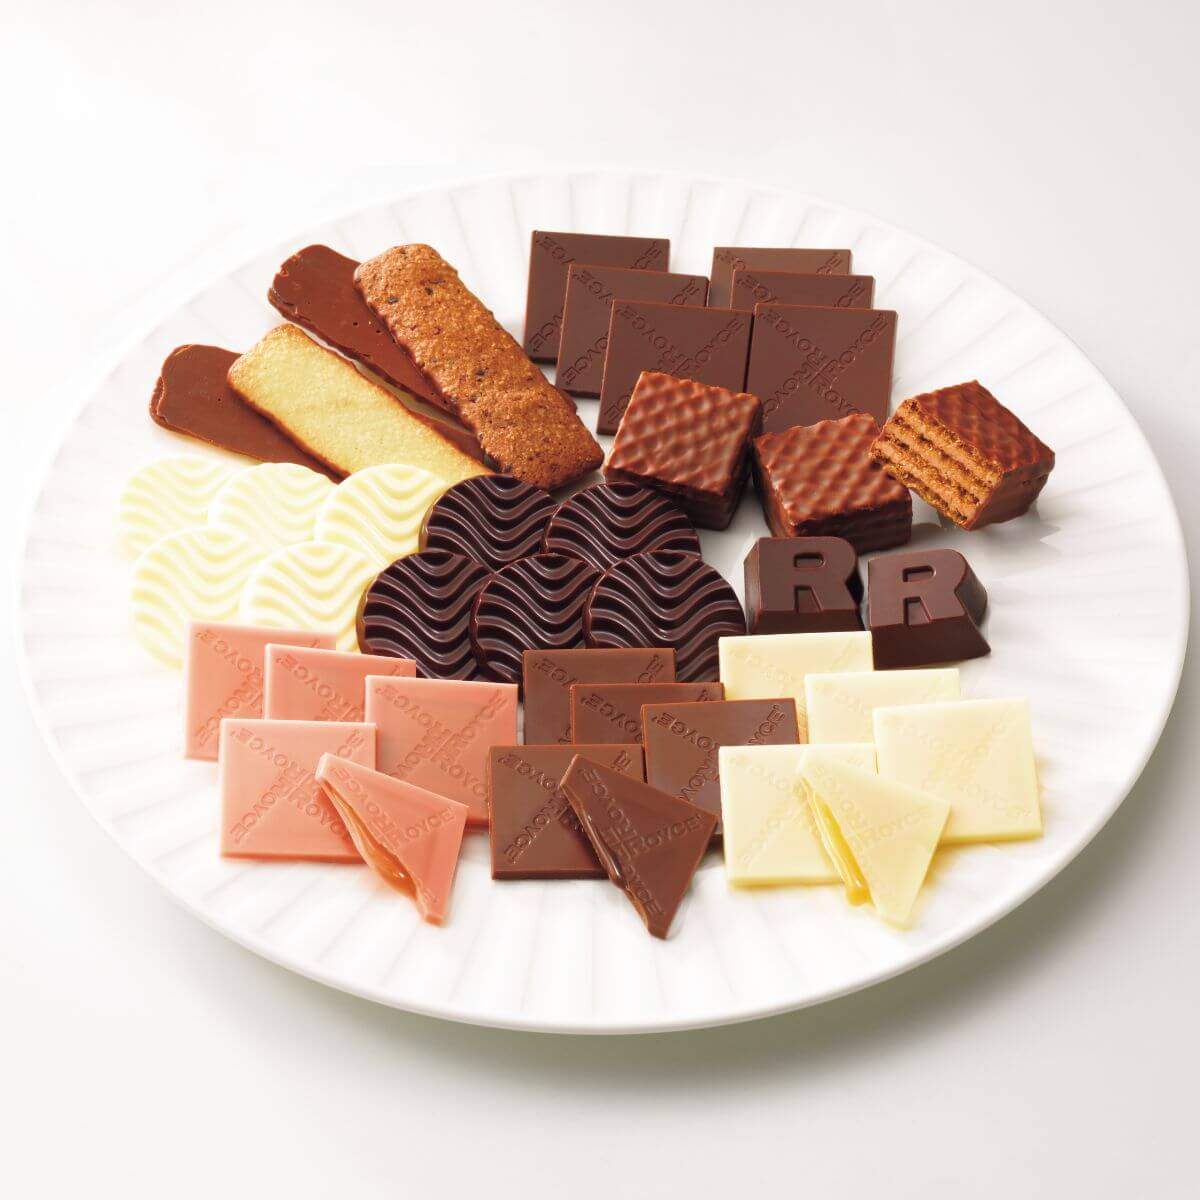 ROYCE' Chocolate - Chocolat No Shiki "Hokkaido" - Image shows confections in different shapes and colors in pink, brown, yellow, and white. The confections are on a white plate.